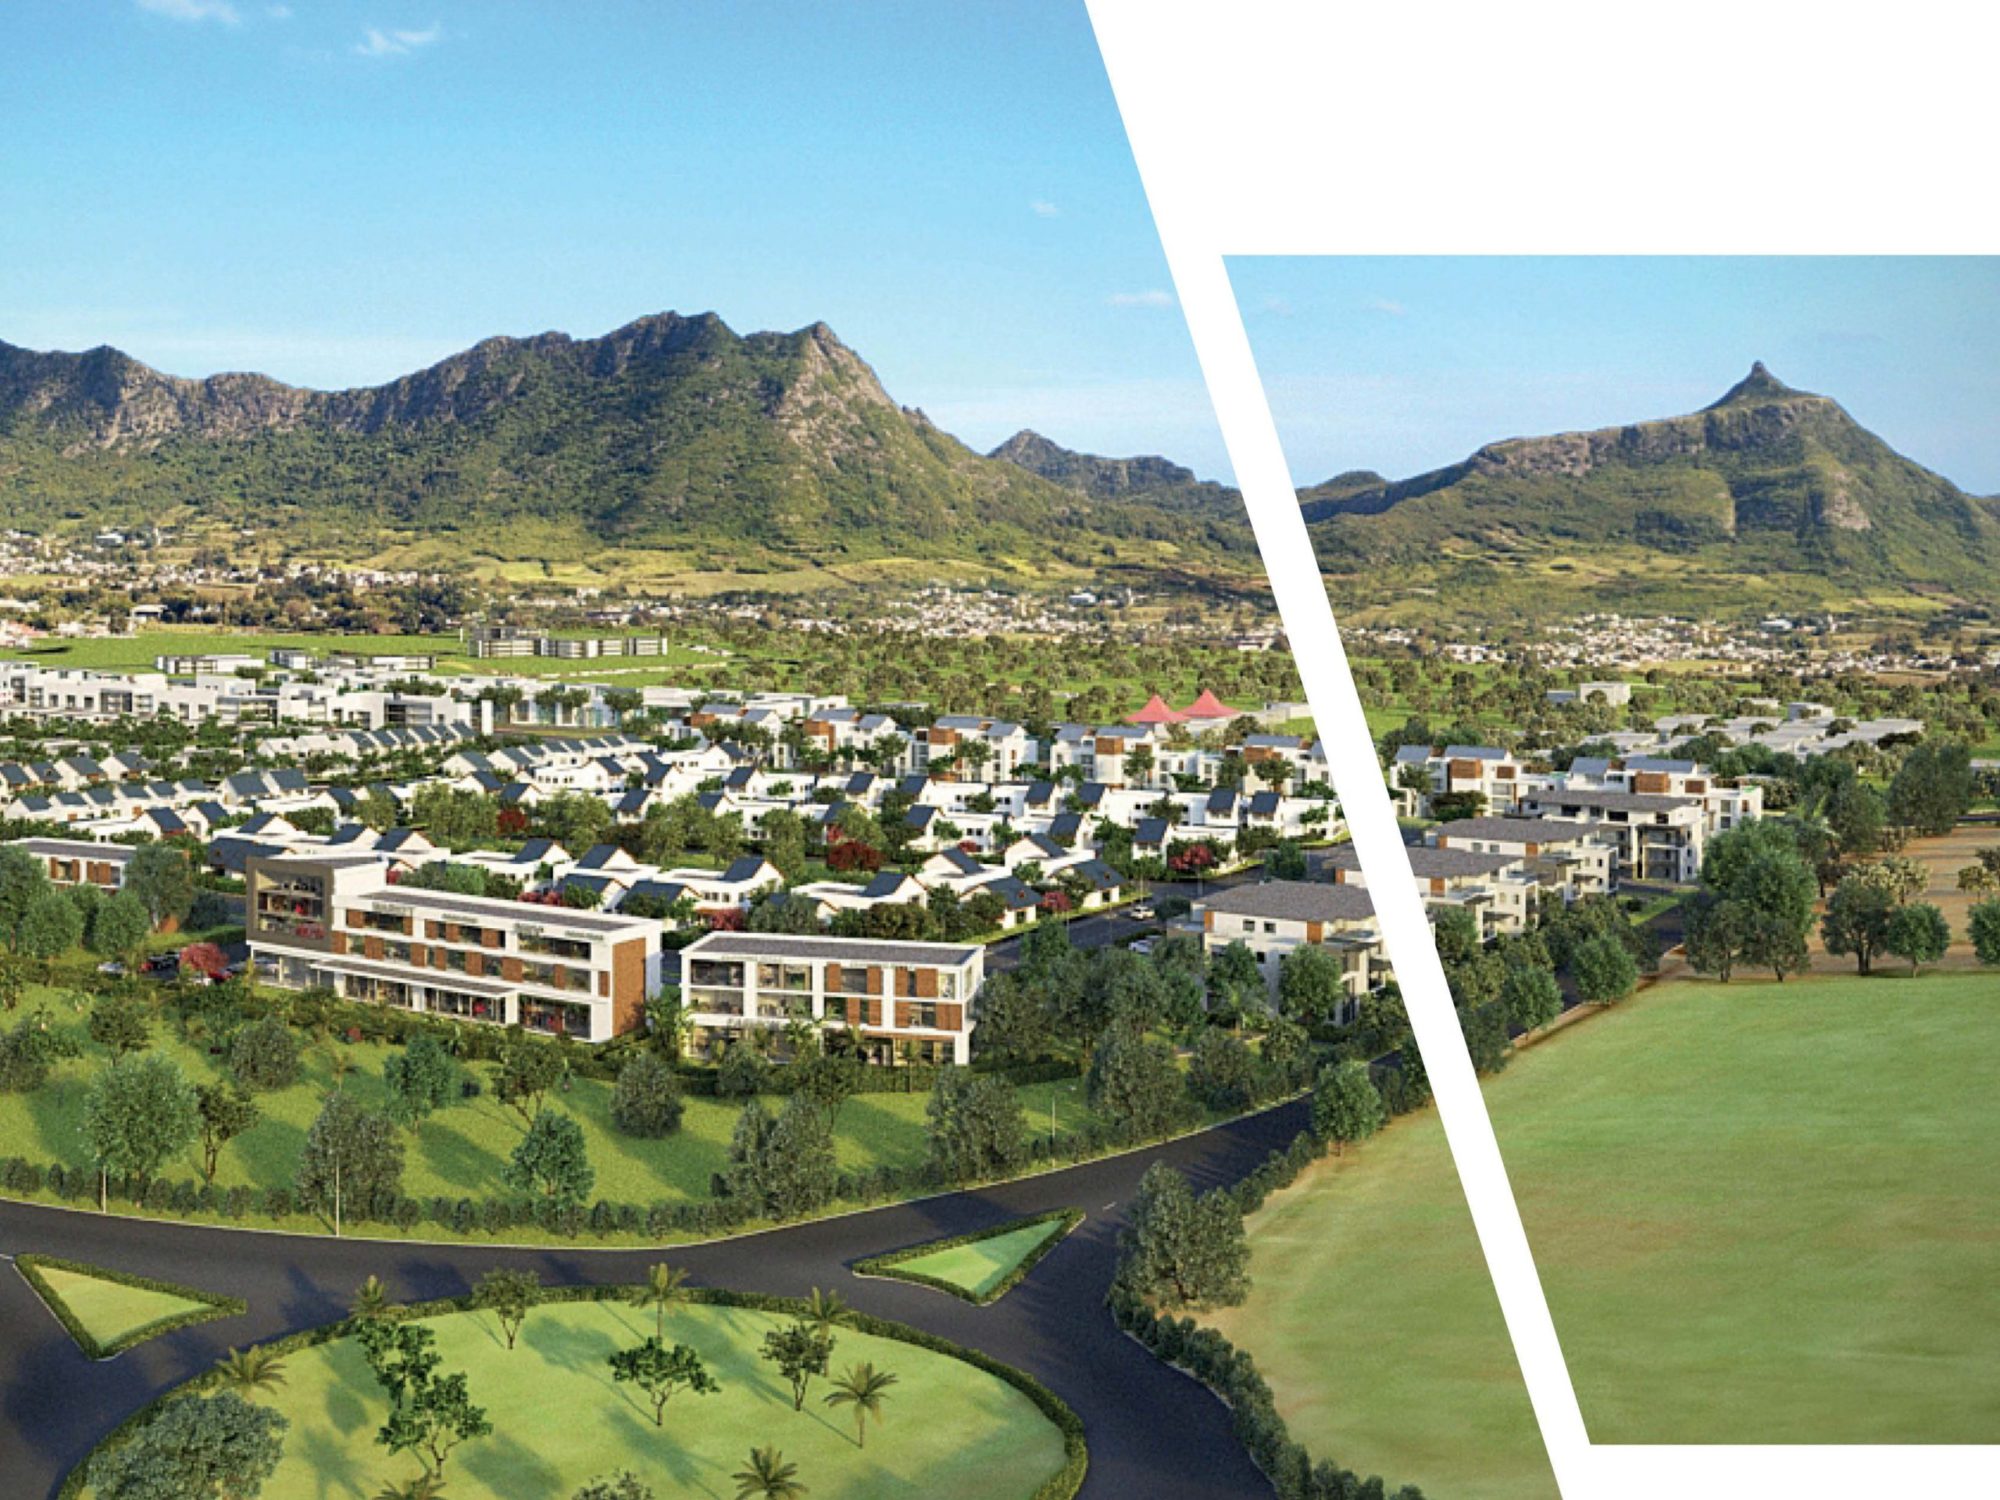 Mauritius today is one of the world’s prime property investment destinations, having recently received the World Bank’s ranking as the top African country for doing business.